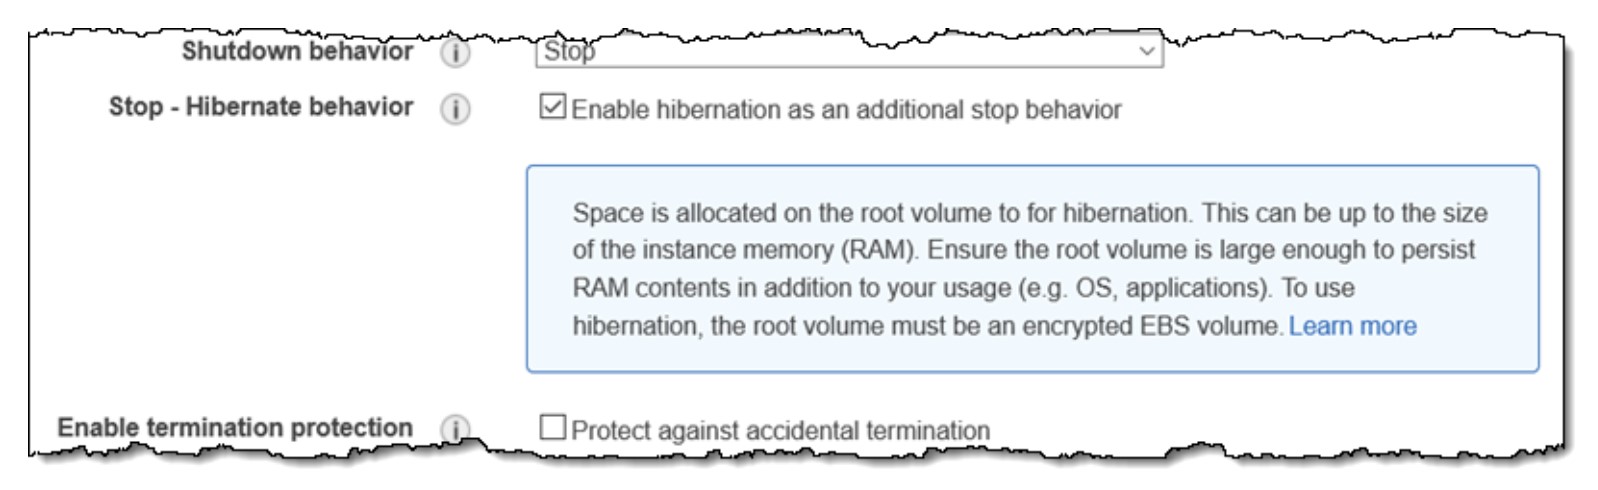 pO, gen a AN ph i
[~ Shutdown behavior (i> Stars ~ ical vf

Stop - Hibernate behavior (j) ¥] Enable hibernation as an additional stop behavior

Space is allocated on the root volume to for hibernation. This can be up to the size
of the instance memory (RAM). Ensure the root volume is large enough to persist

RAM contents in addition to your usage (e.g. OS, applications). To use
hibernation, the root volume must be an encrypted EBS volume. Learn more

Enable termination protection

Protect against accidental termination